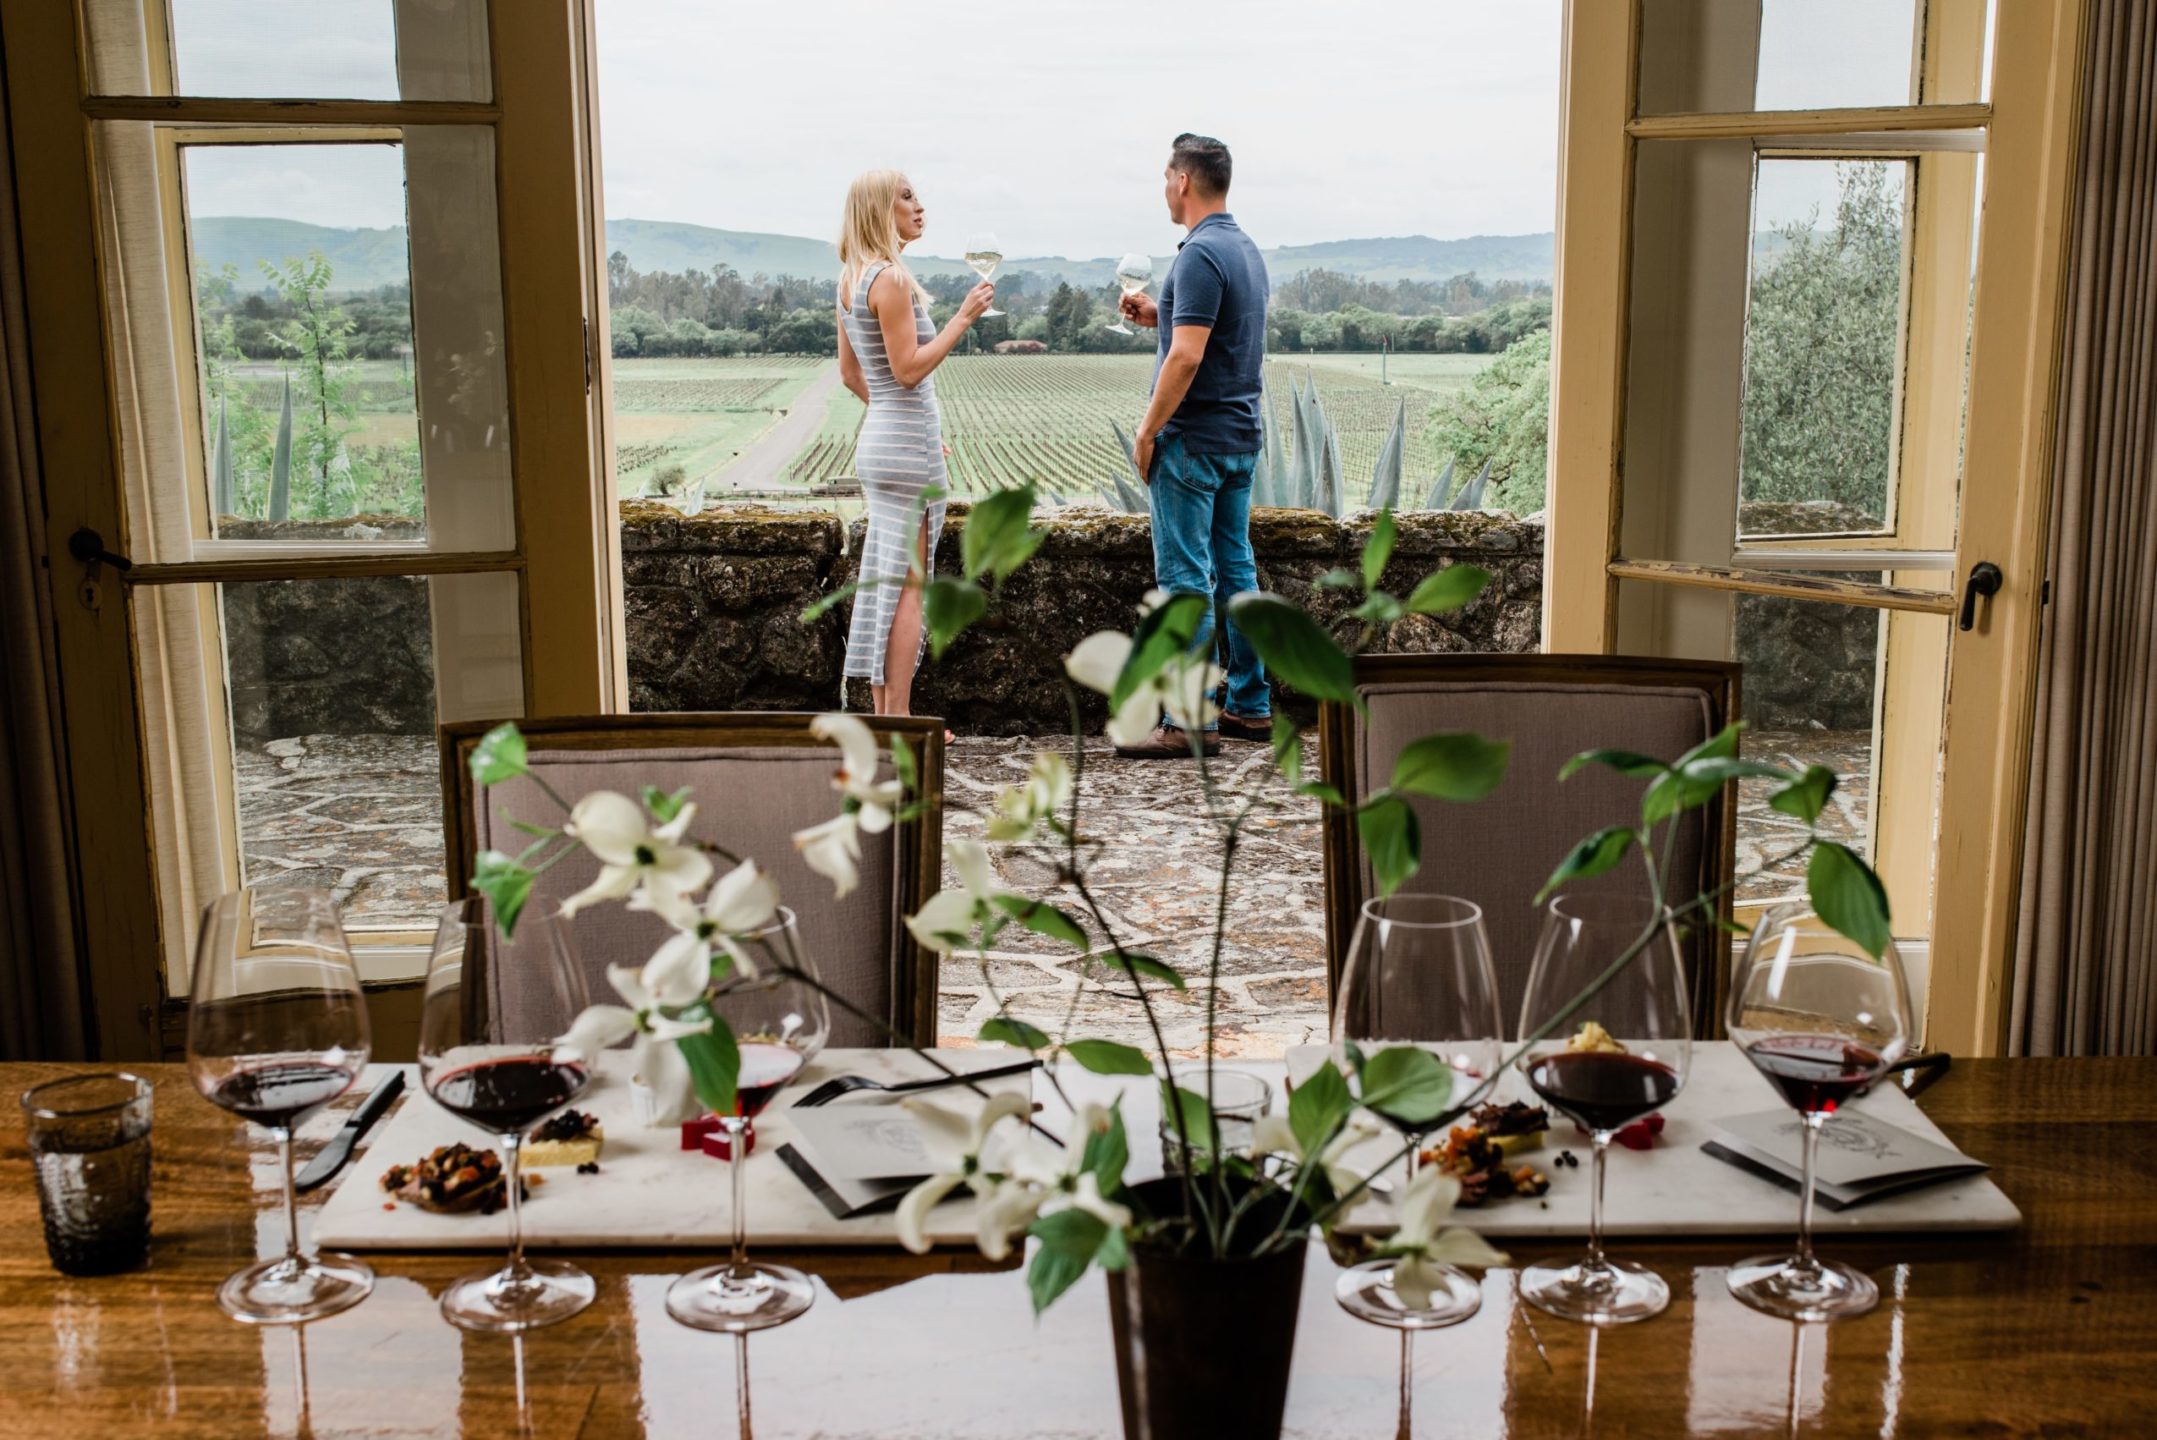 Image of man and woman on the terrace outside of room having a private Heritage Tasting experience with small plates of food, wine glasses and flowers on the table